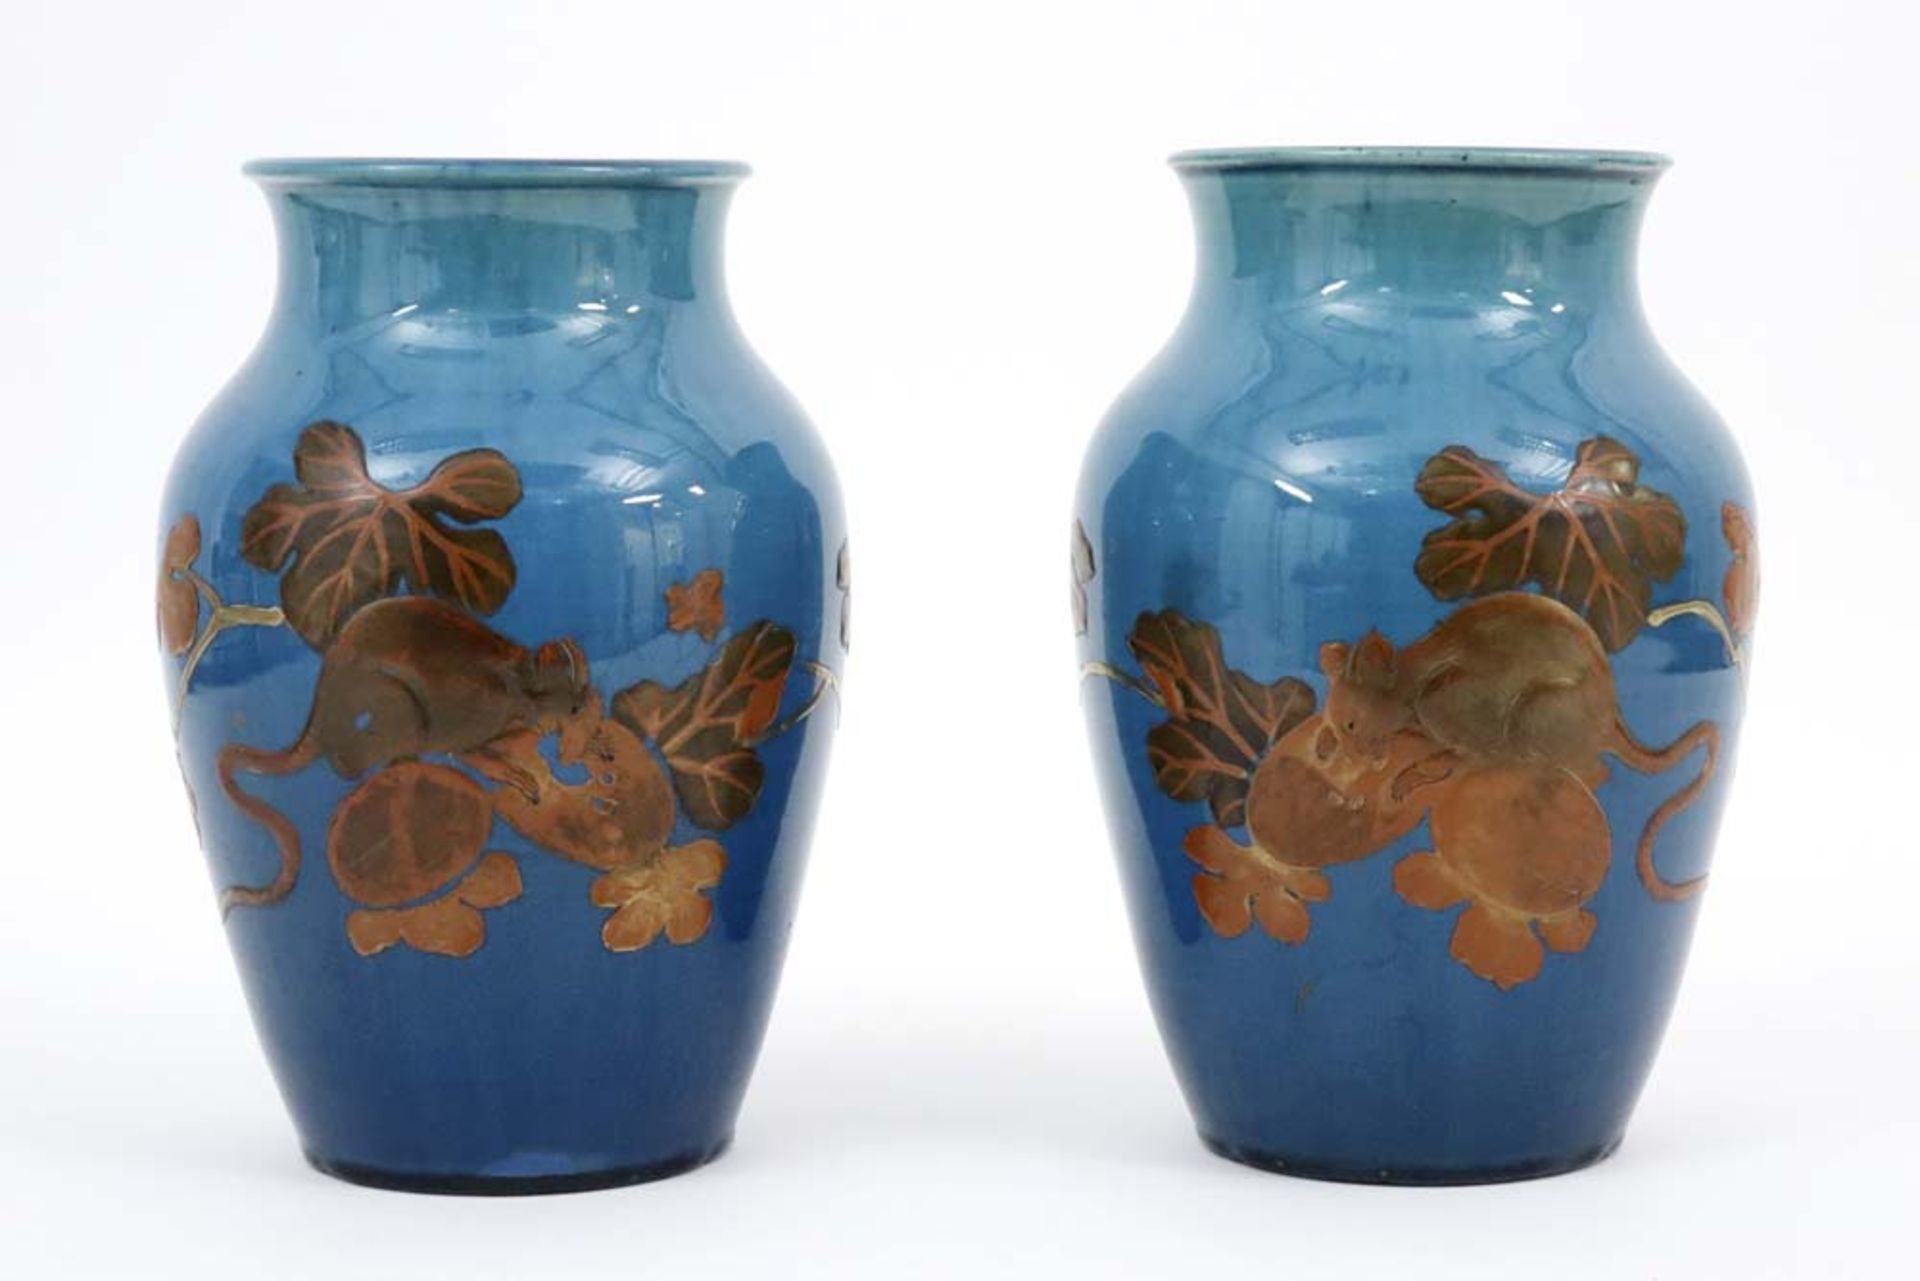 pair of antique Japanese vases in ceramic with lacquerware decor with a mouse eating a nut || Paar